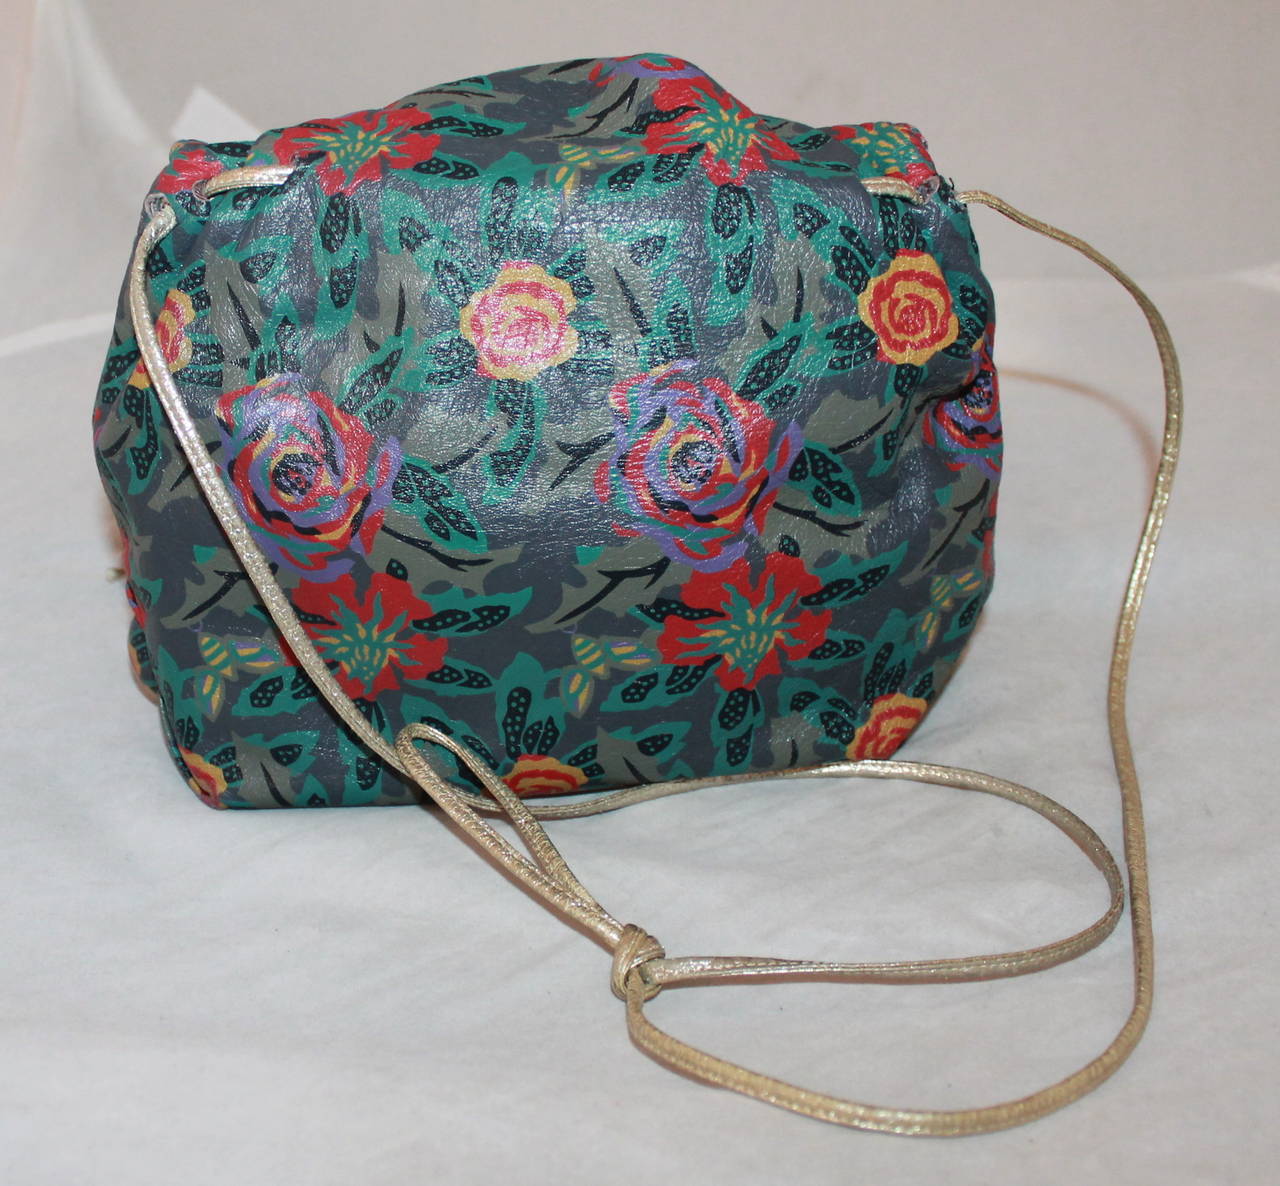 Carlos Falchi 1970's Green Floral Print Leather Crossbody Bag. This bag is in very good vintage condition with wear consistent to its age. The strap can be adjusted by tying the knot higher & lower. 

Measurements:
Length- 8.5